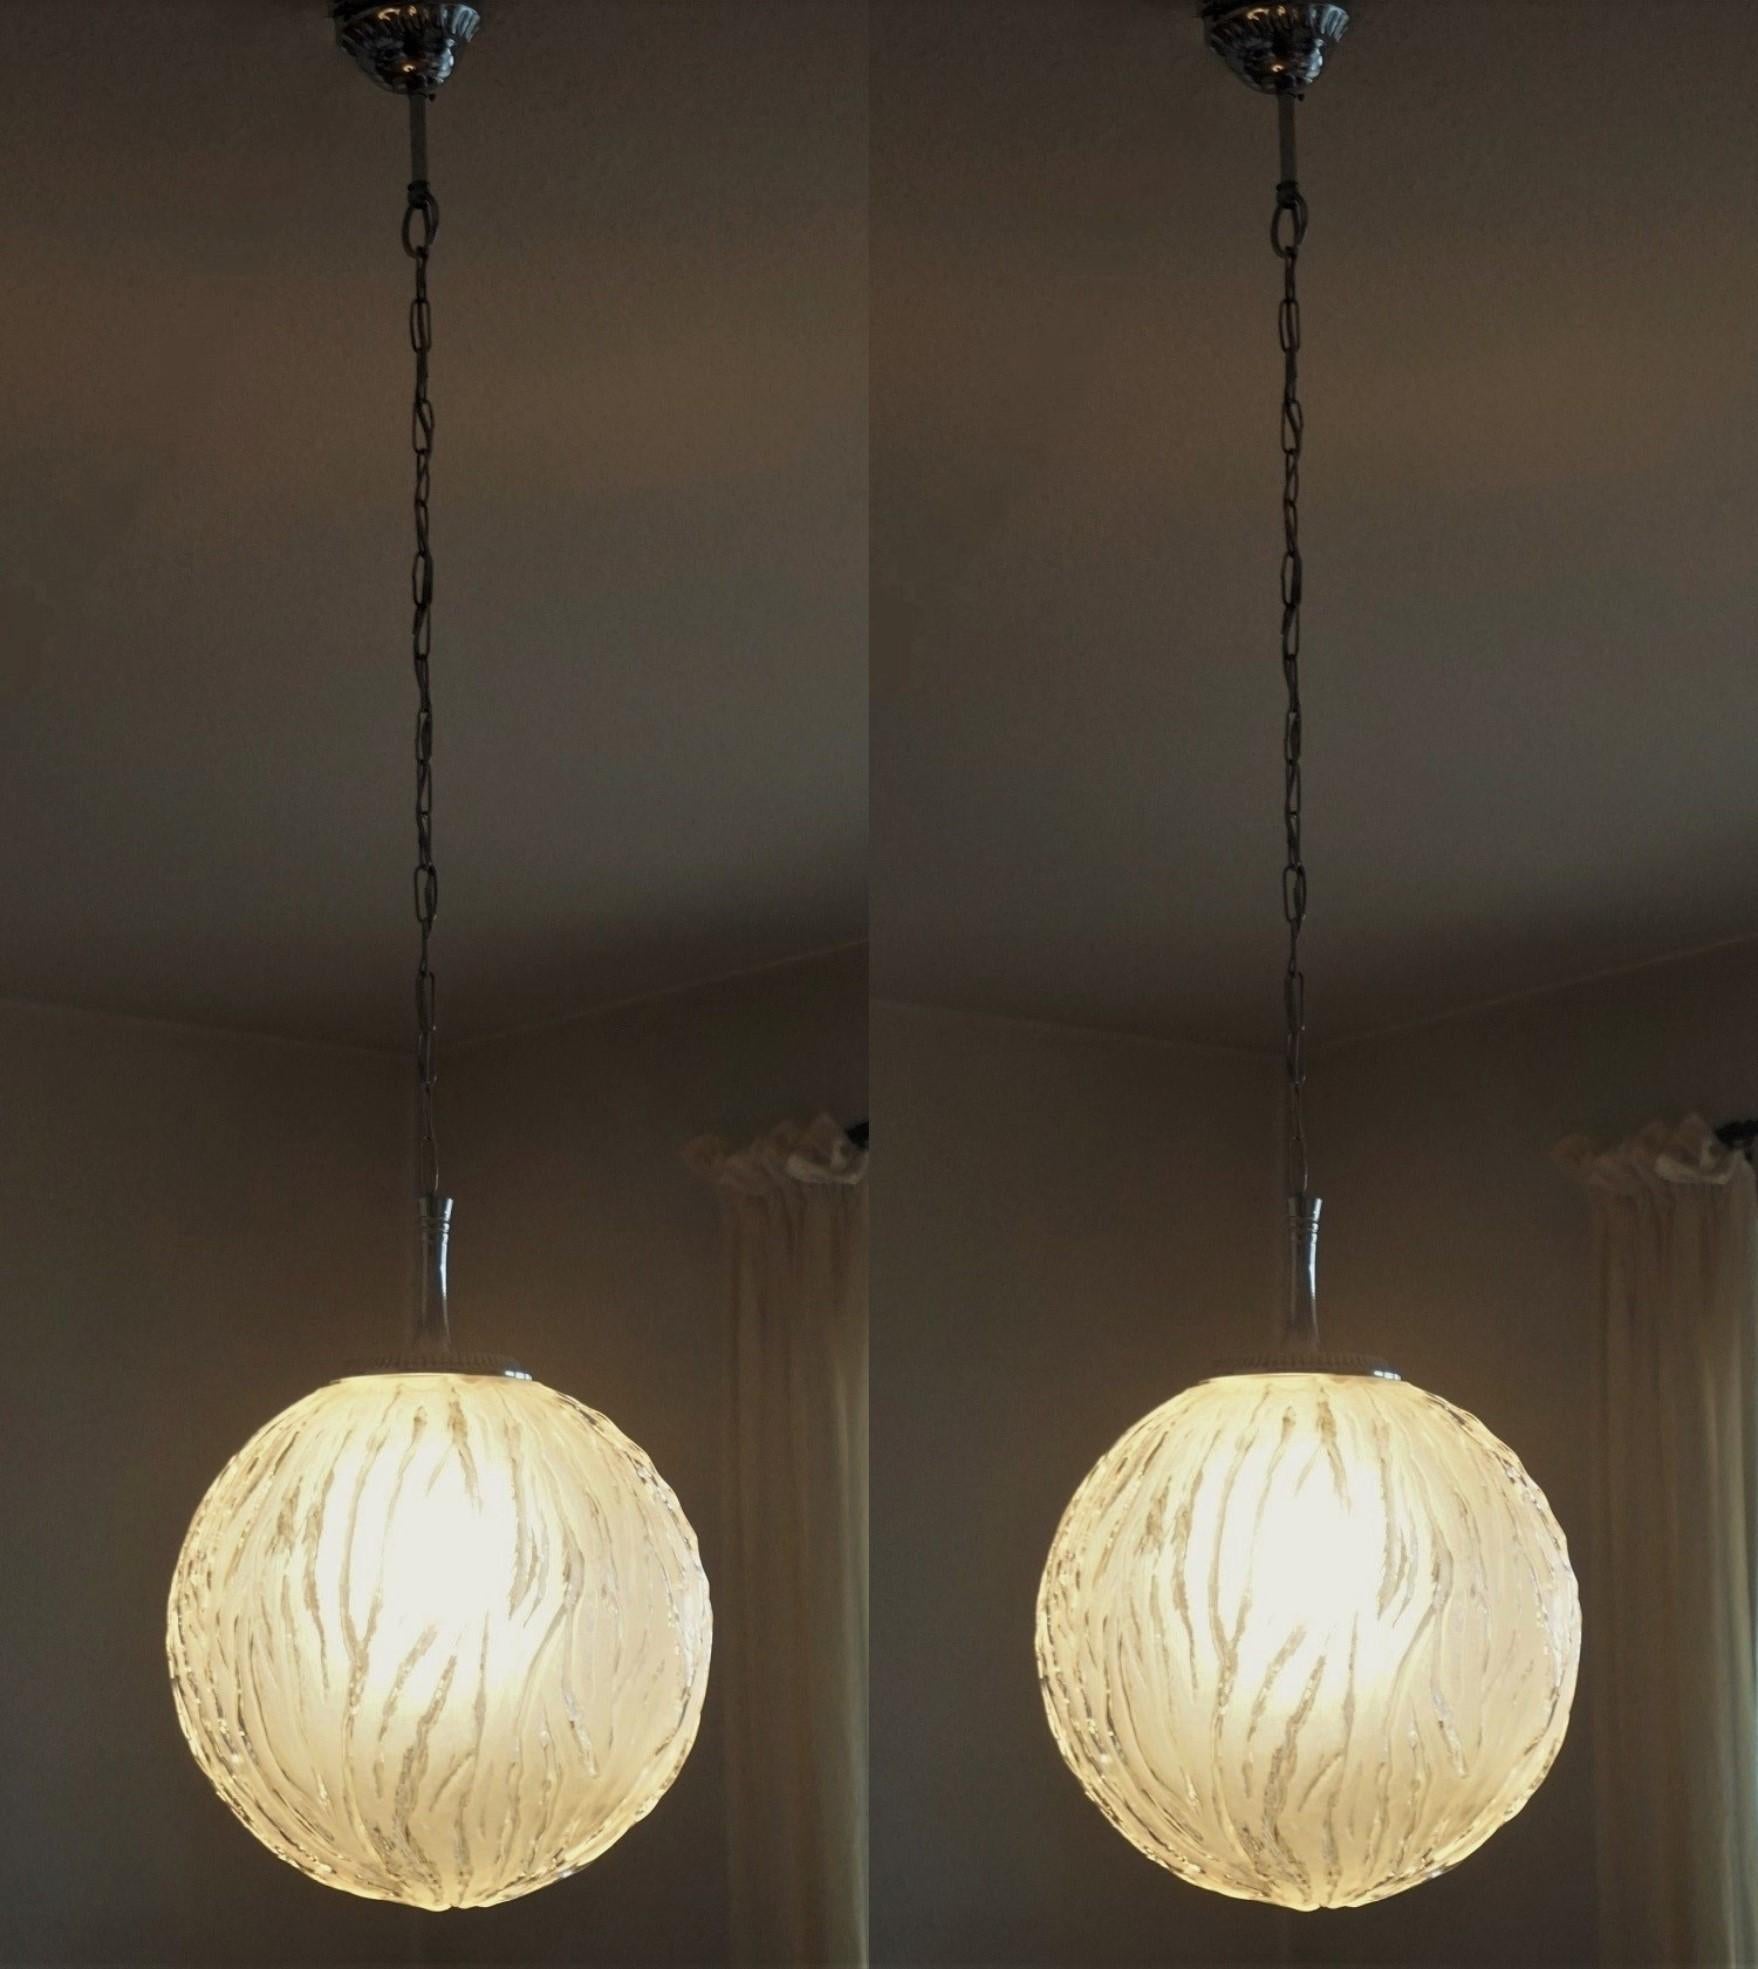 A pair of Art Deco  glass sphere pendants or lanterns with chrome mounts in Degue Style, France, 1950s.
One Edison E27 light socket for a large sized bulb up to 100W
both pendants are in fine condition, rewired.
Measures: Height 45